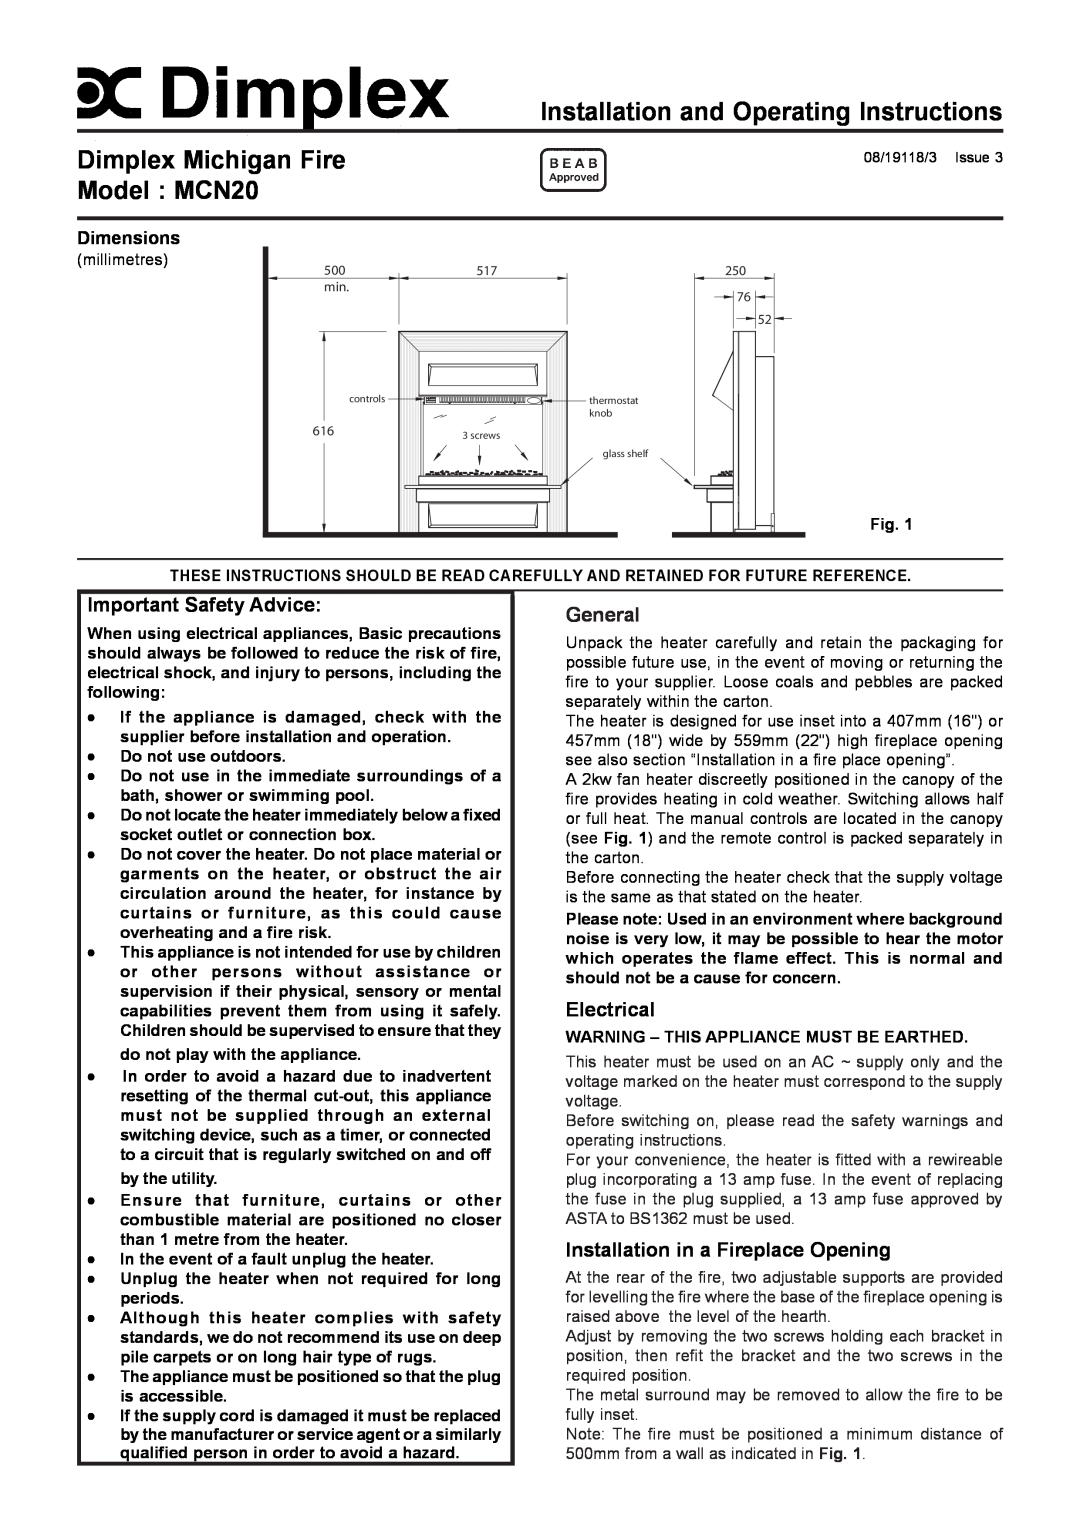 Dimplex MCN20 dimensions Important Safety Advice, General, Electrical, Installation in a Fireplace Opening, Dimensions 